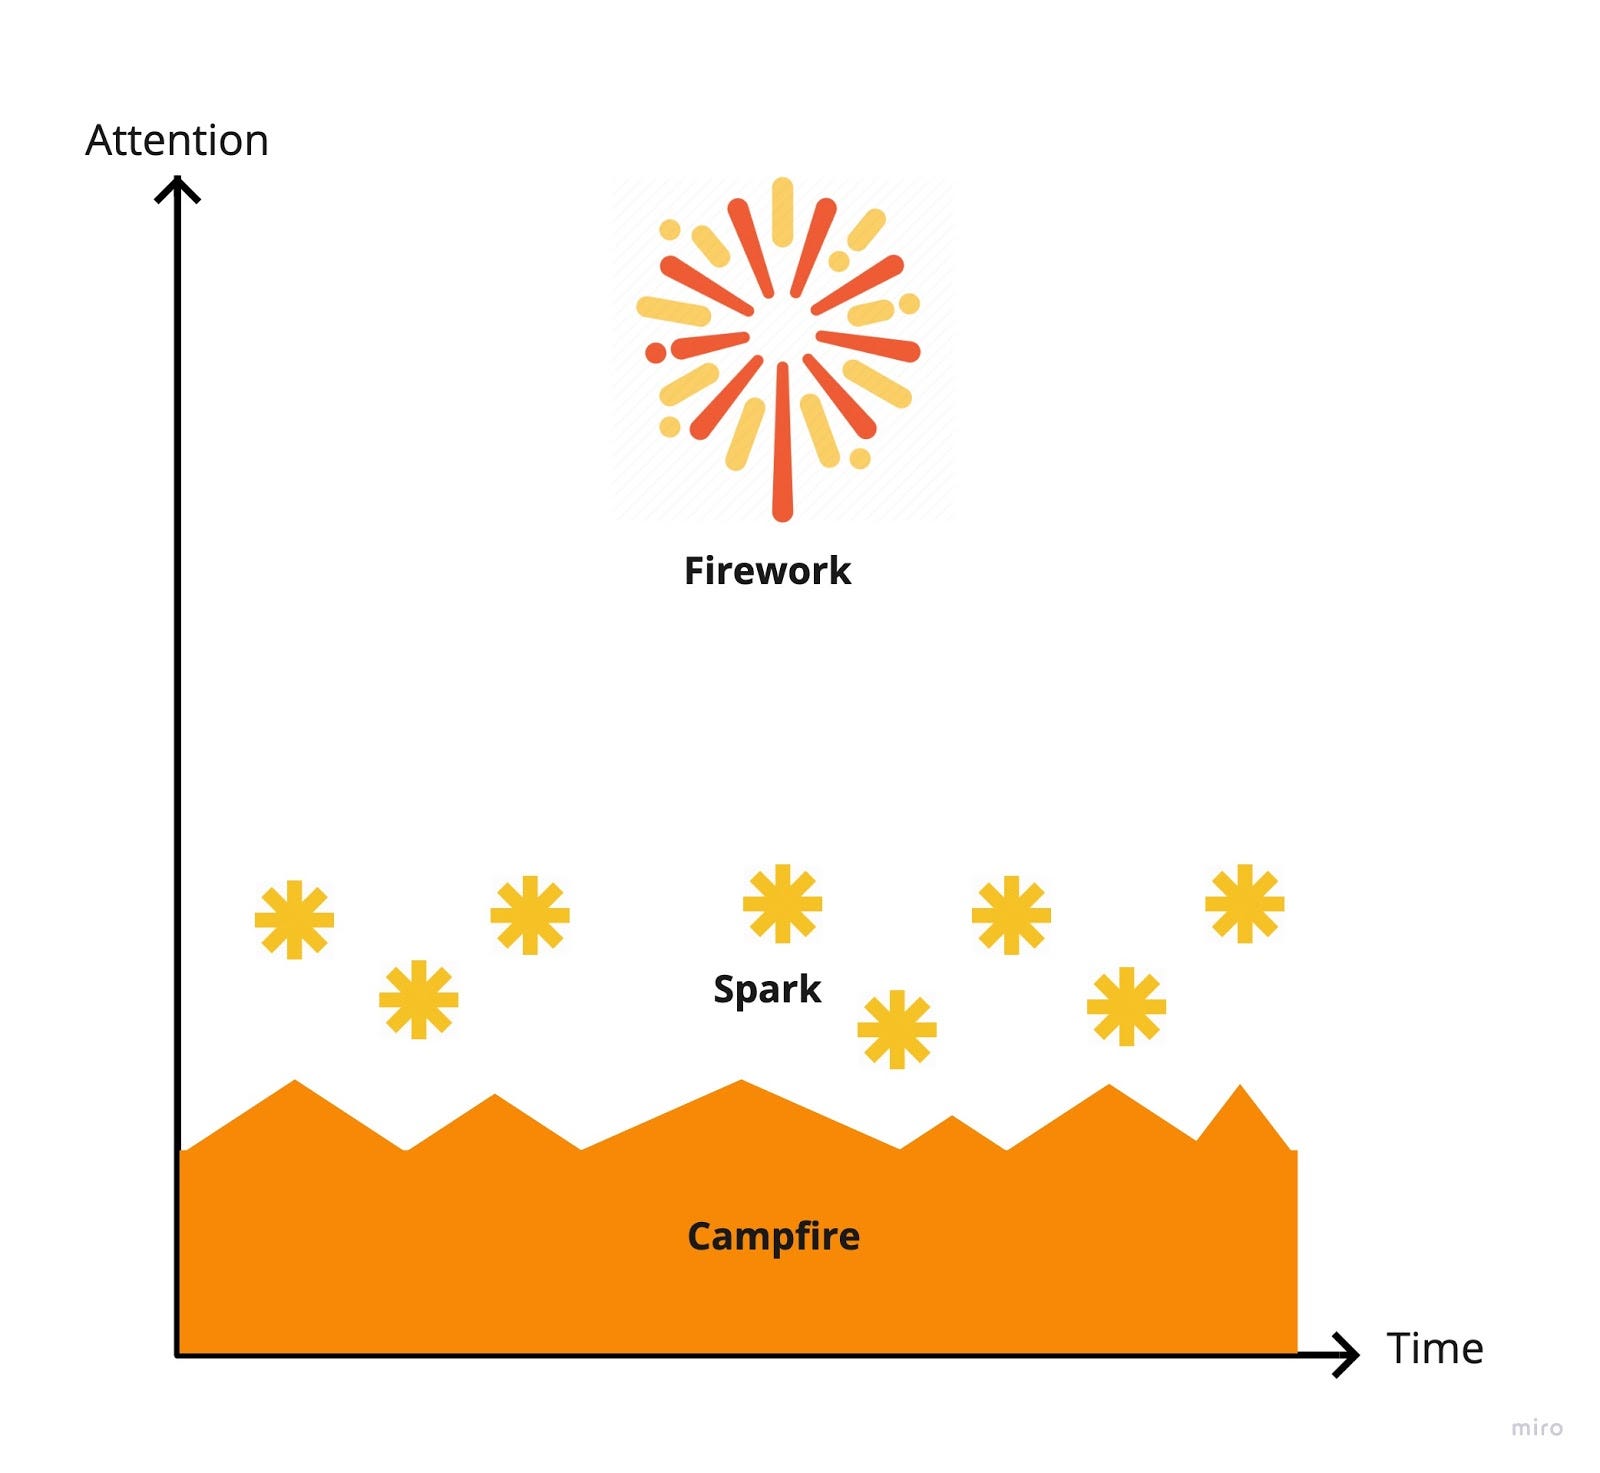 The image shows a chart, one axis is attention, the other is time. ‘Firework’ is high on the attention axis, but occupies a short timespan. ‘Sparks’ are in the middle of the attention axis, and occur regularly throughout across the time axis. Campfire is low on the attention axis, but spreads consistently across the whole time axis.